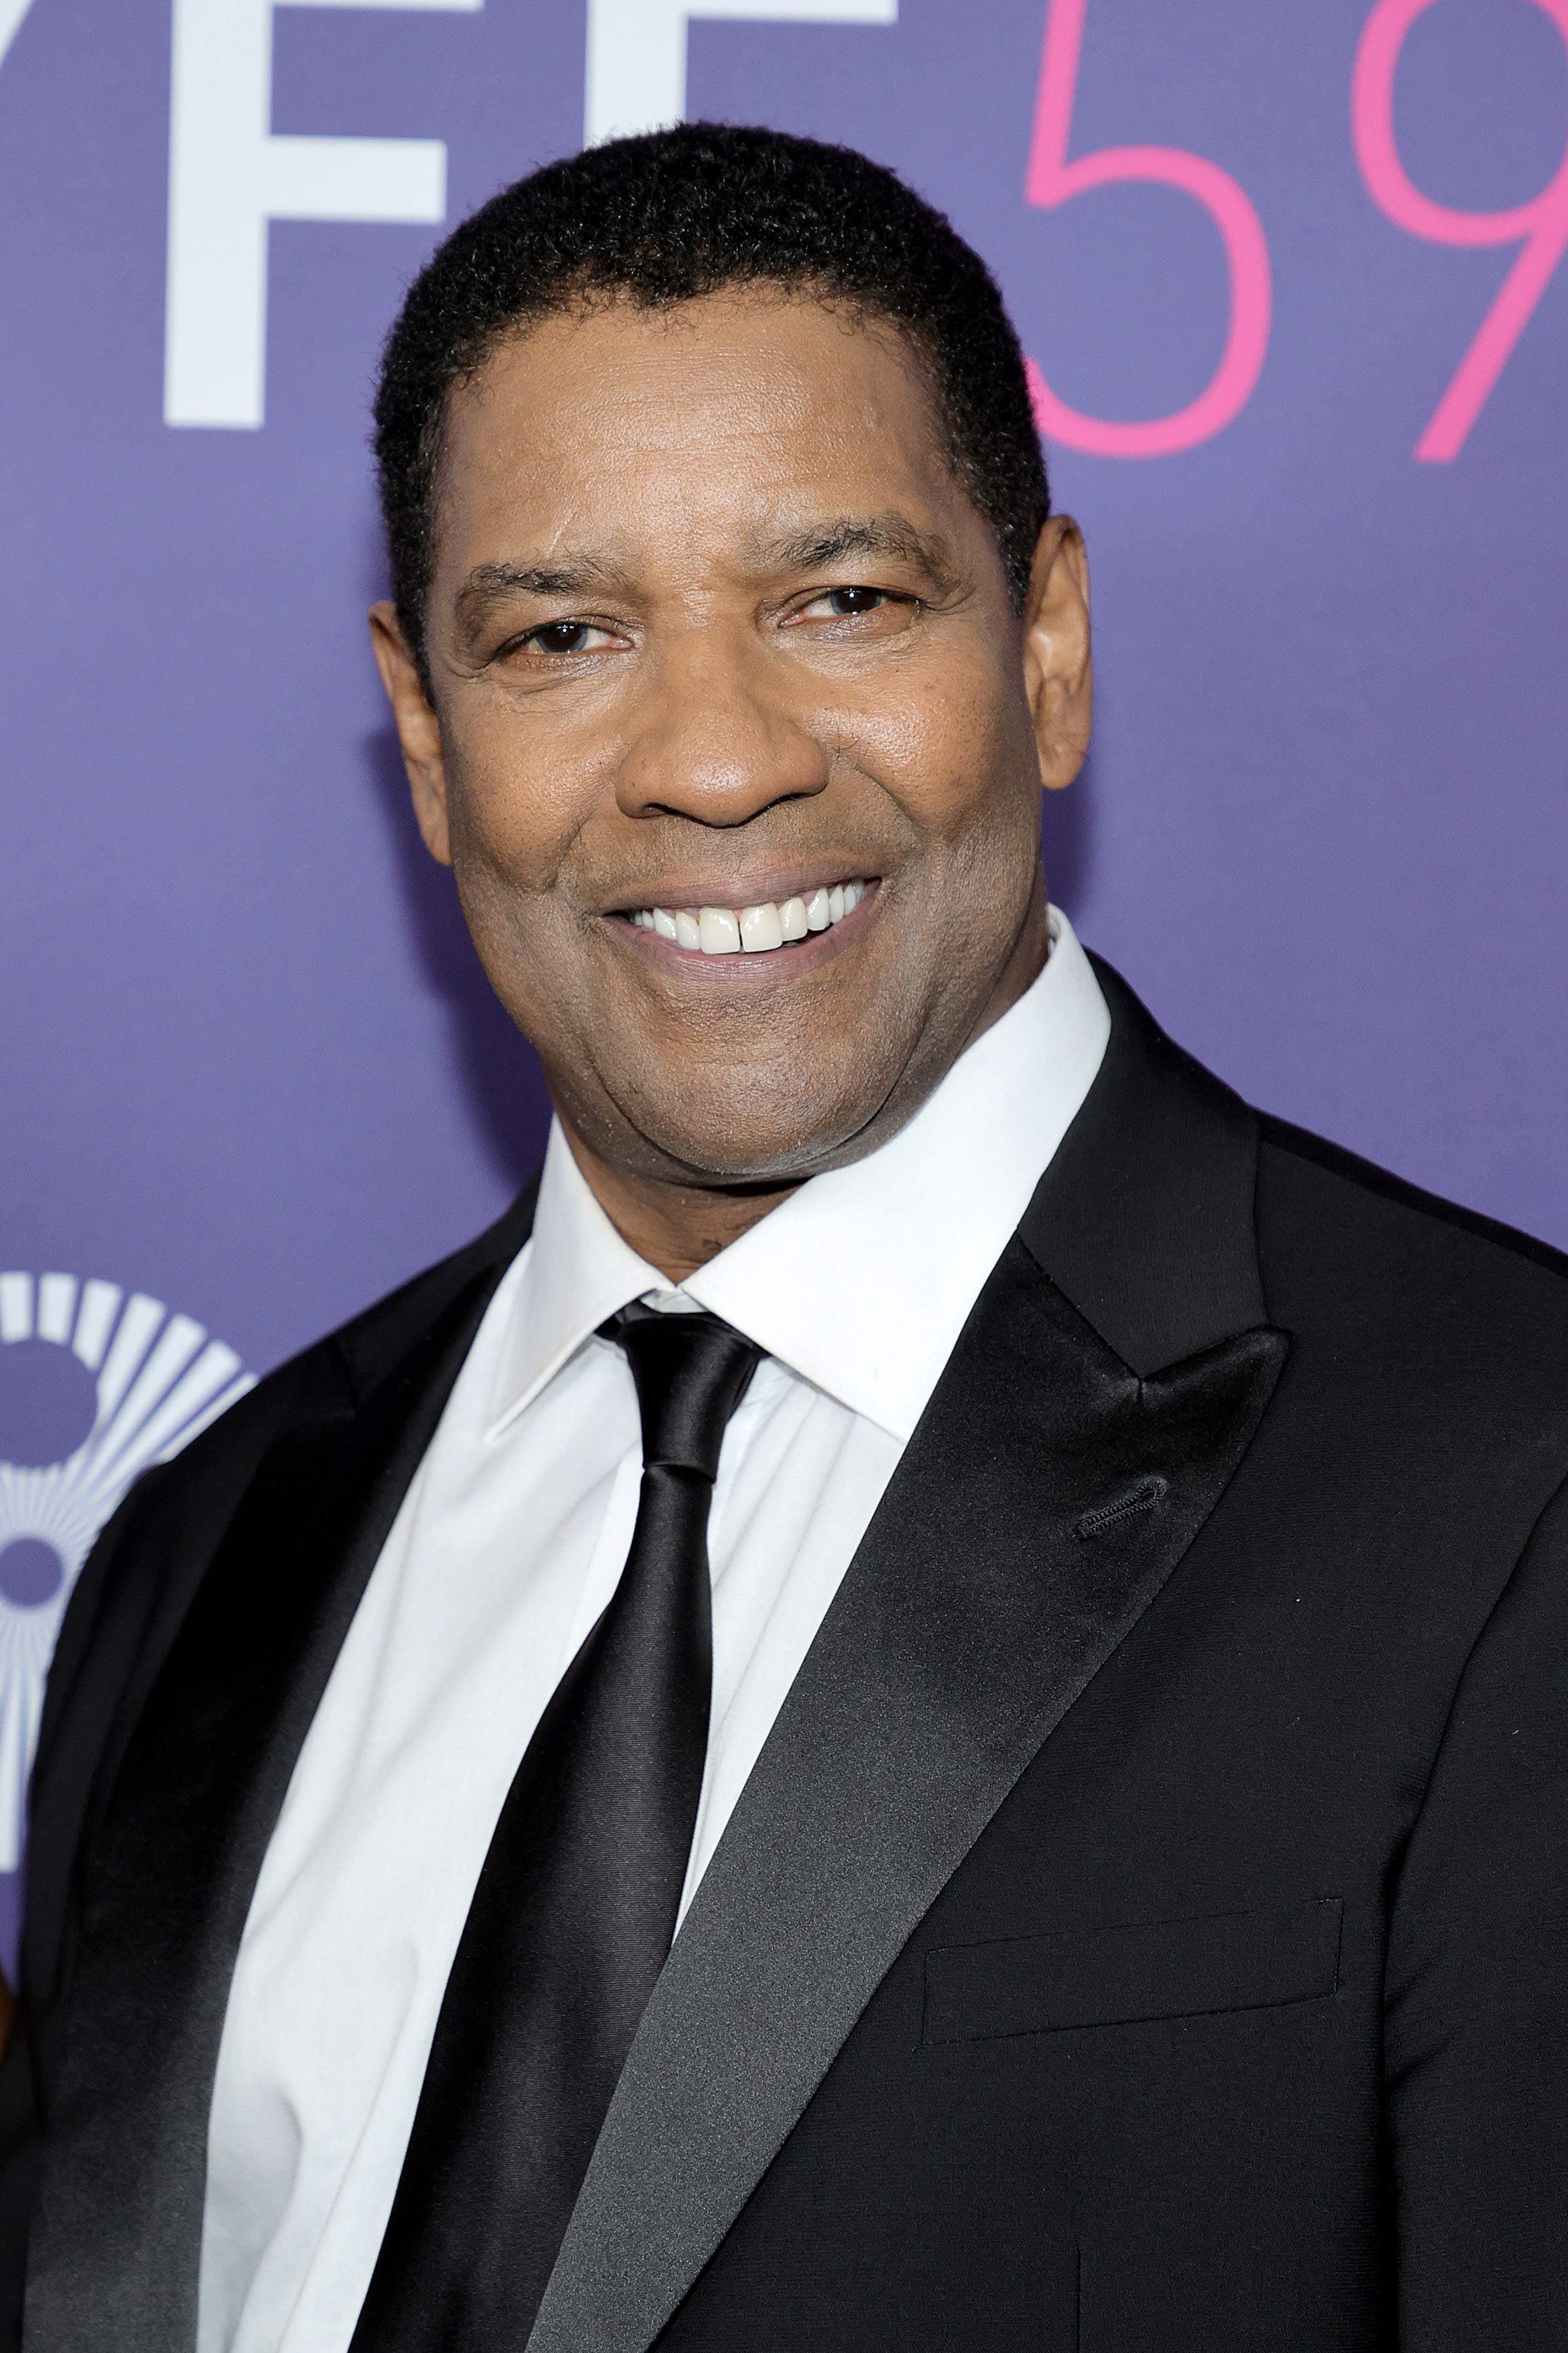 Denzel at an event in a suit and tie